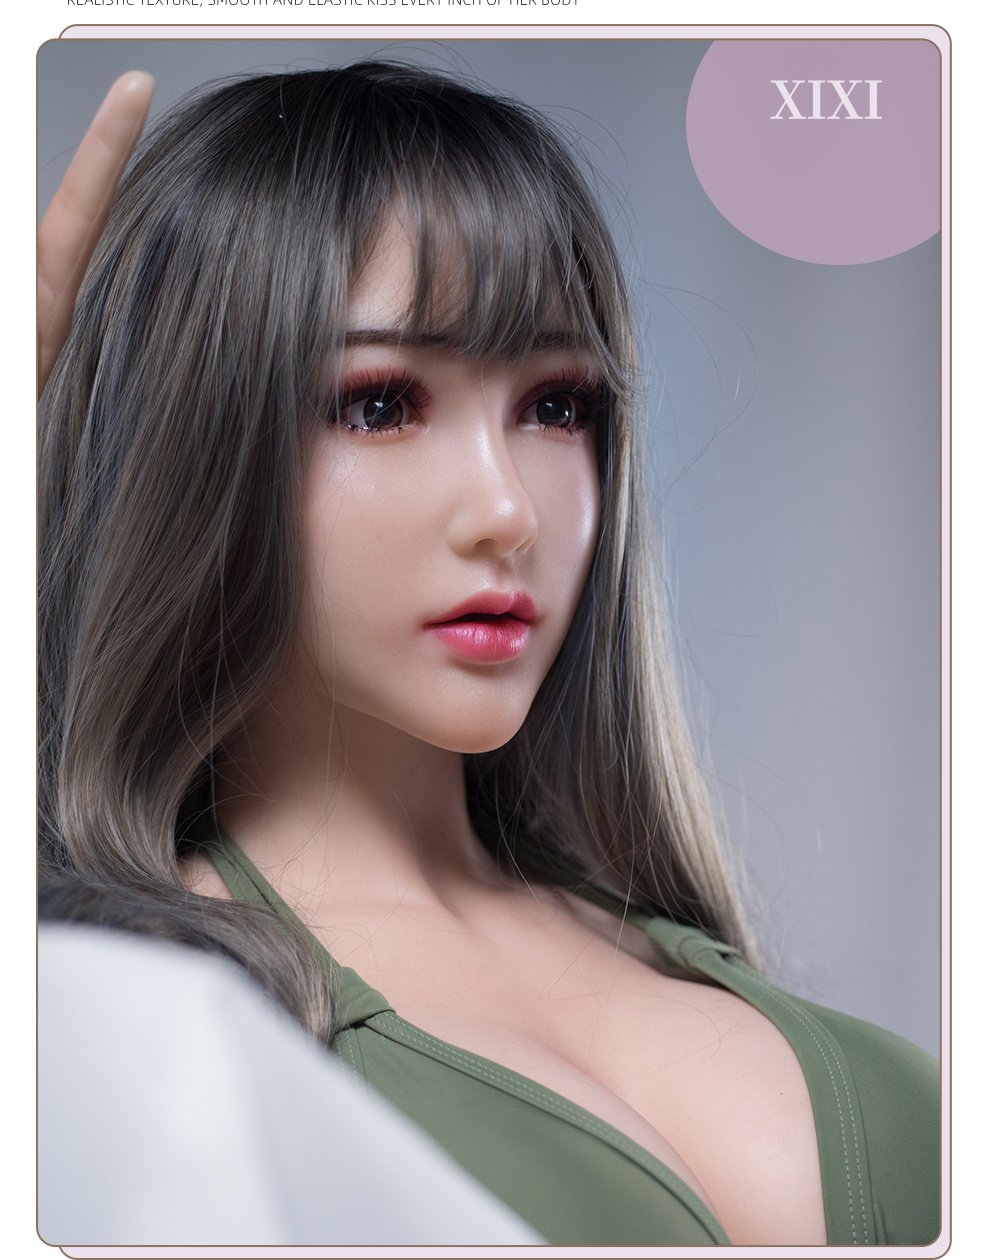 Clm (Climax doll) 2020 Skeleton Permanent Makeup Best Price Full Body Silicone Sex Doll Sex Toy